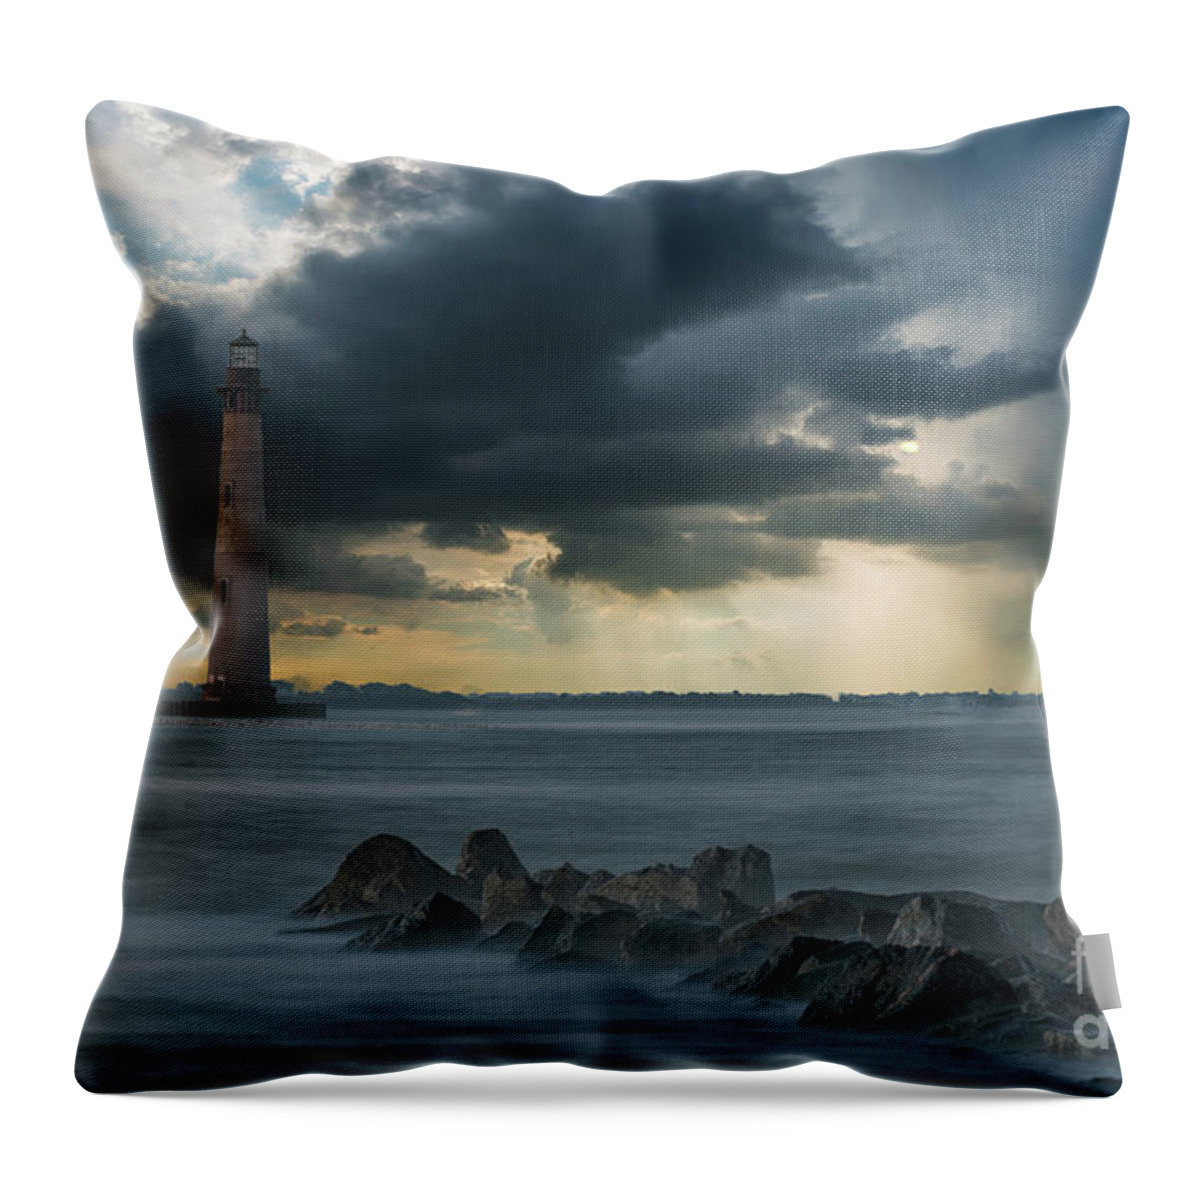 Morris Island Lighthouse Throw Pillow featuring the photograph Stormy Morris Island by Dale Powell